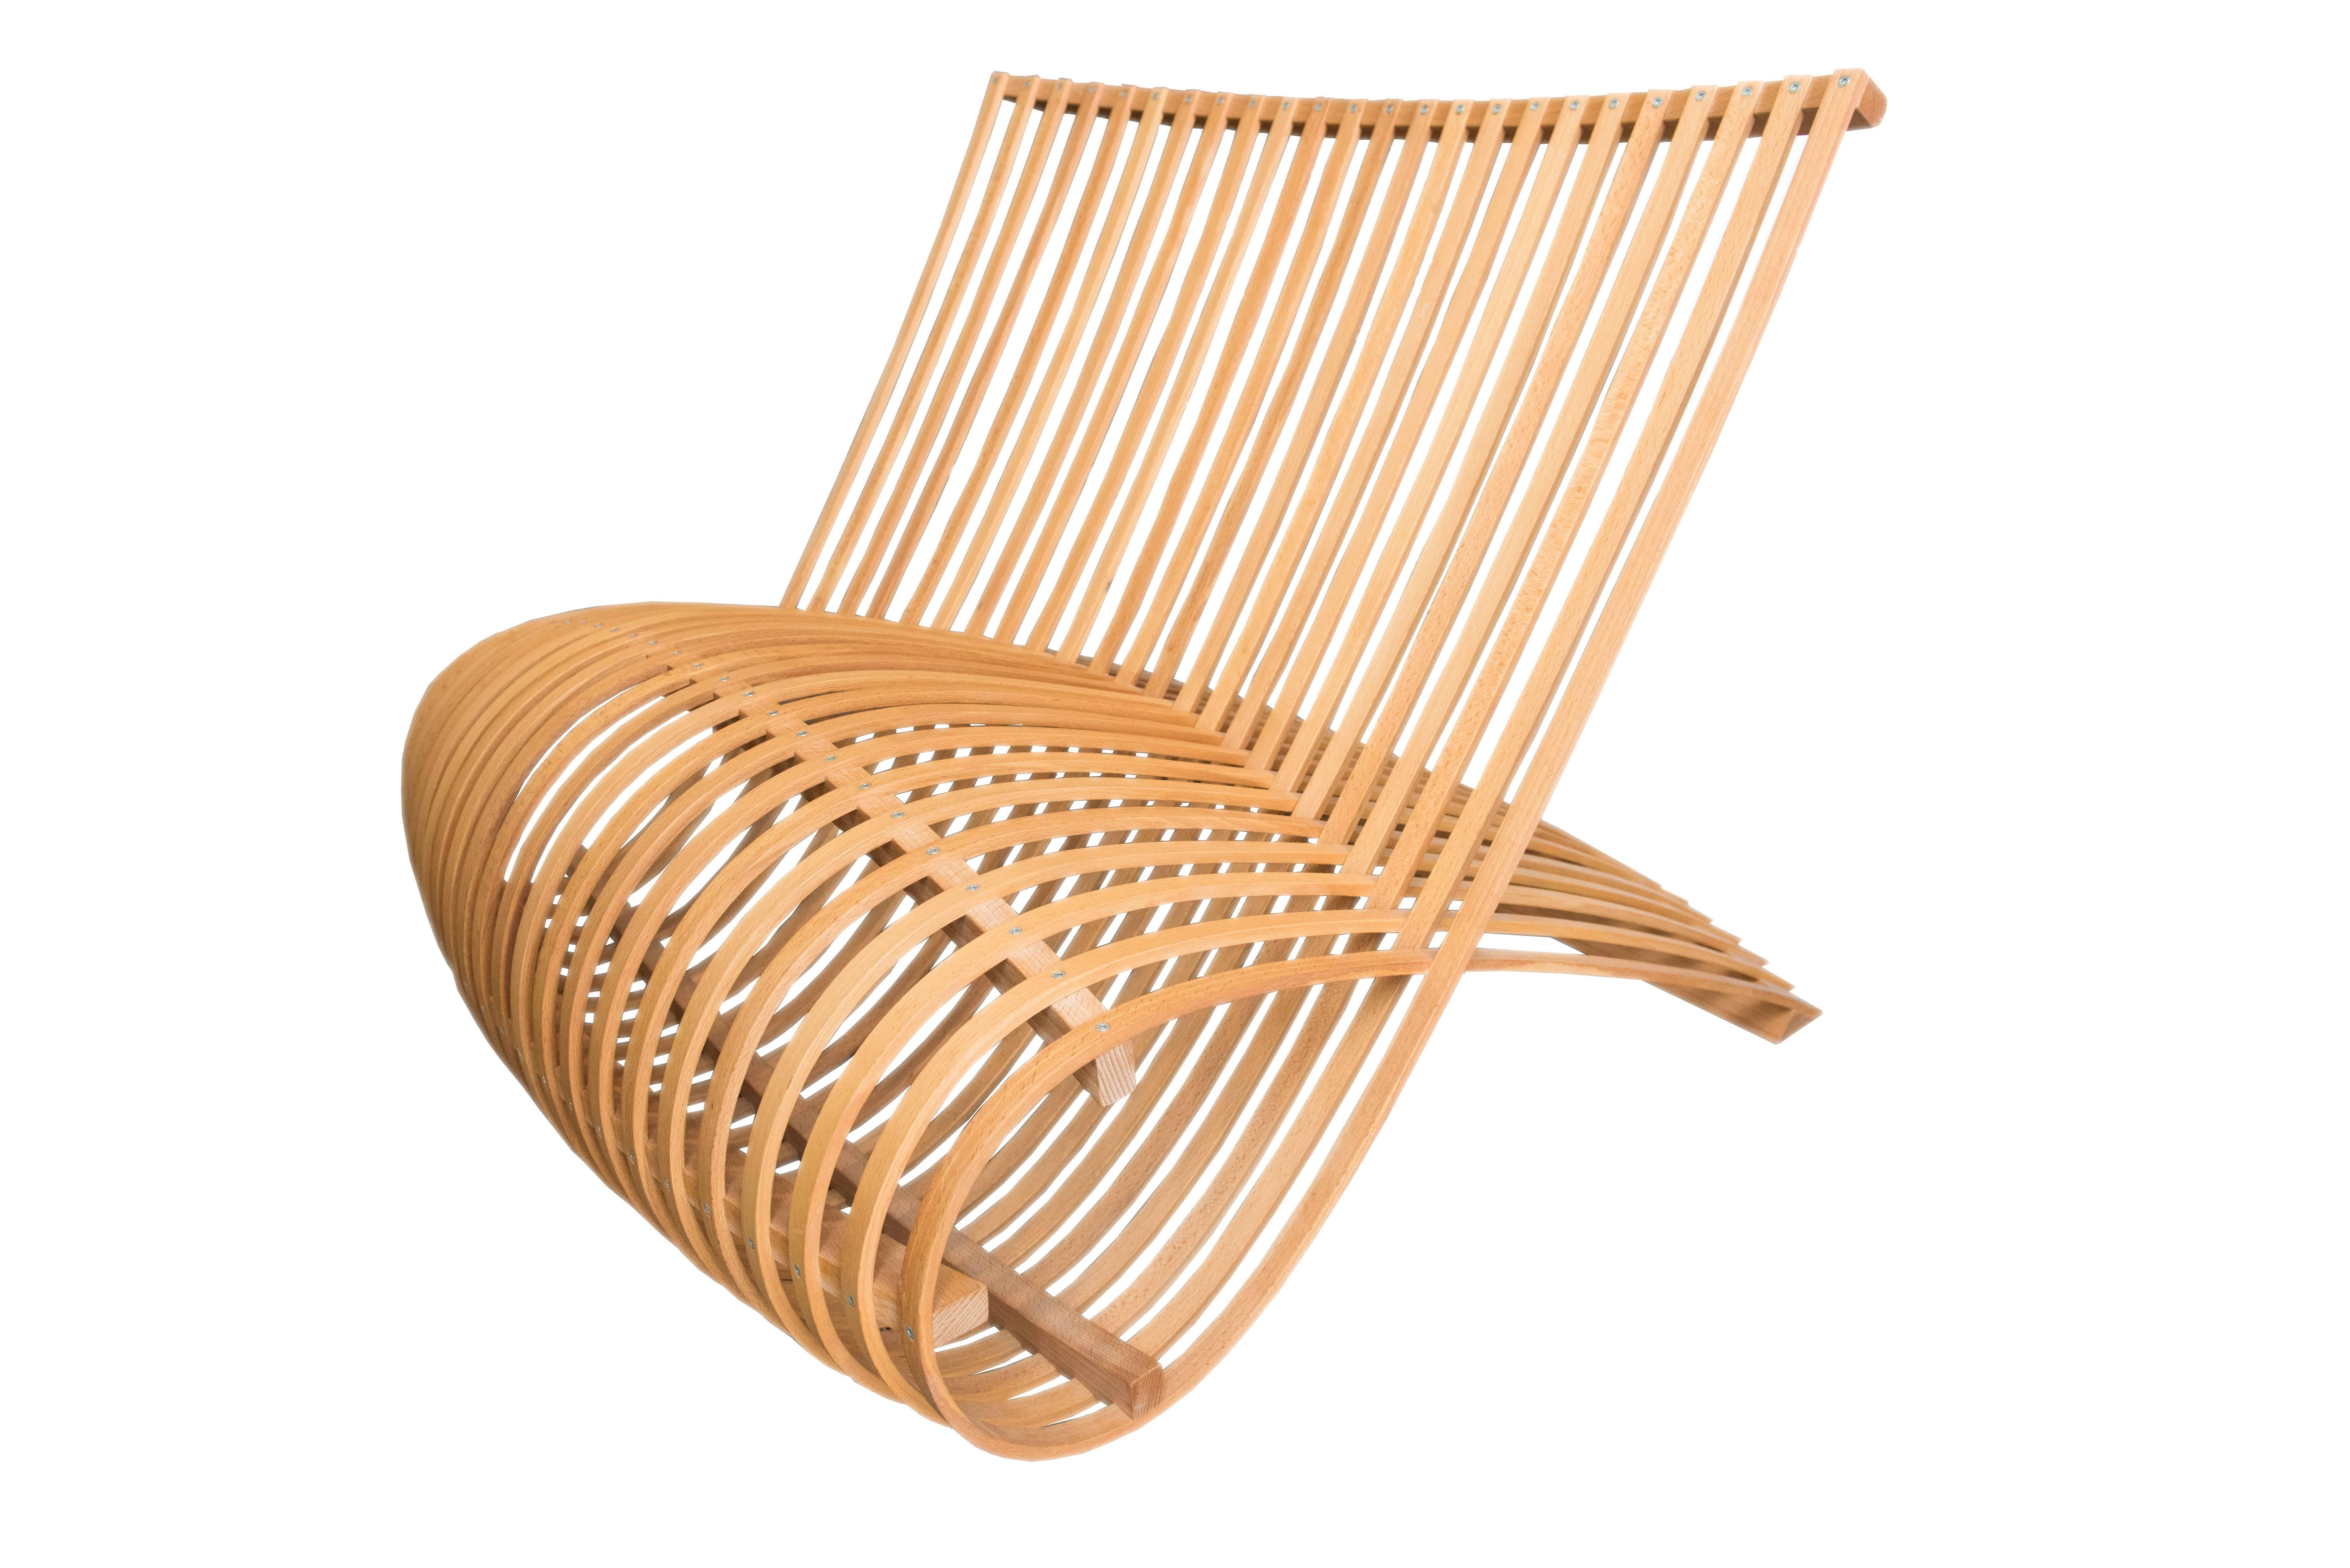 Small armchair manufactured in bent natural beech heartwood.

About the Designer
Marc Newson

Born in Australia in 1963, Marc Newson worked around the world, first in Tokyo, then in Paris and finally in London where he, along with Benjamin de